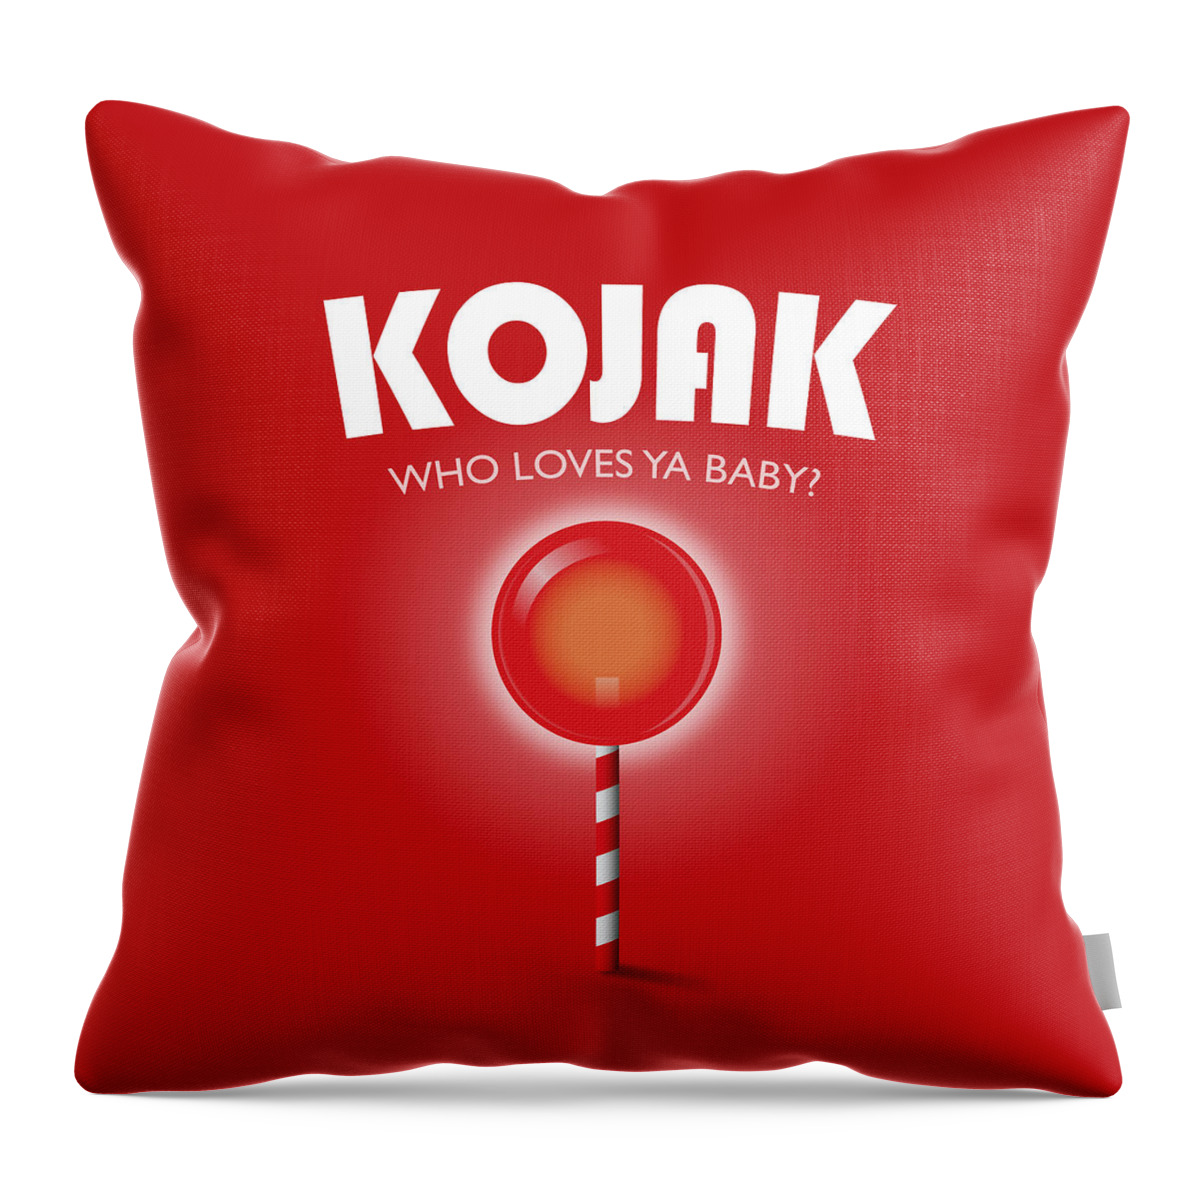 Movie Poster Throw Pillow featuring the digital art Kojak TV series poster by Movie Poster Boy